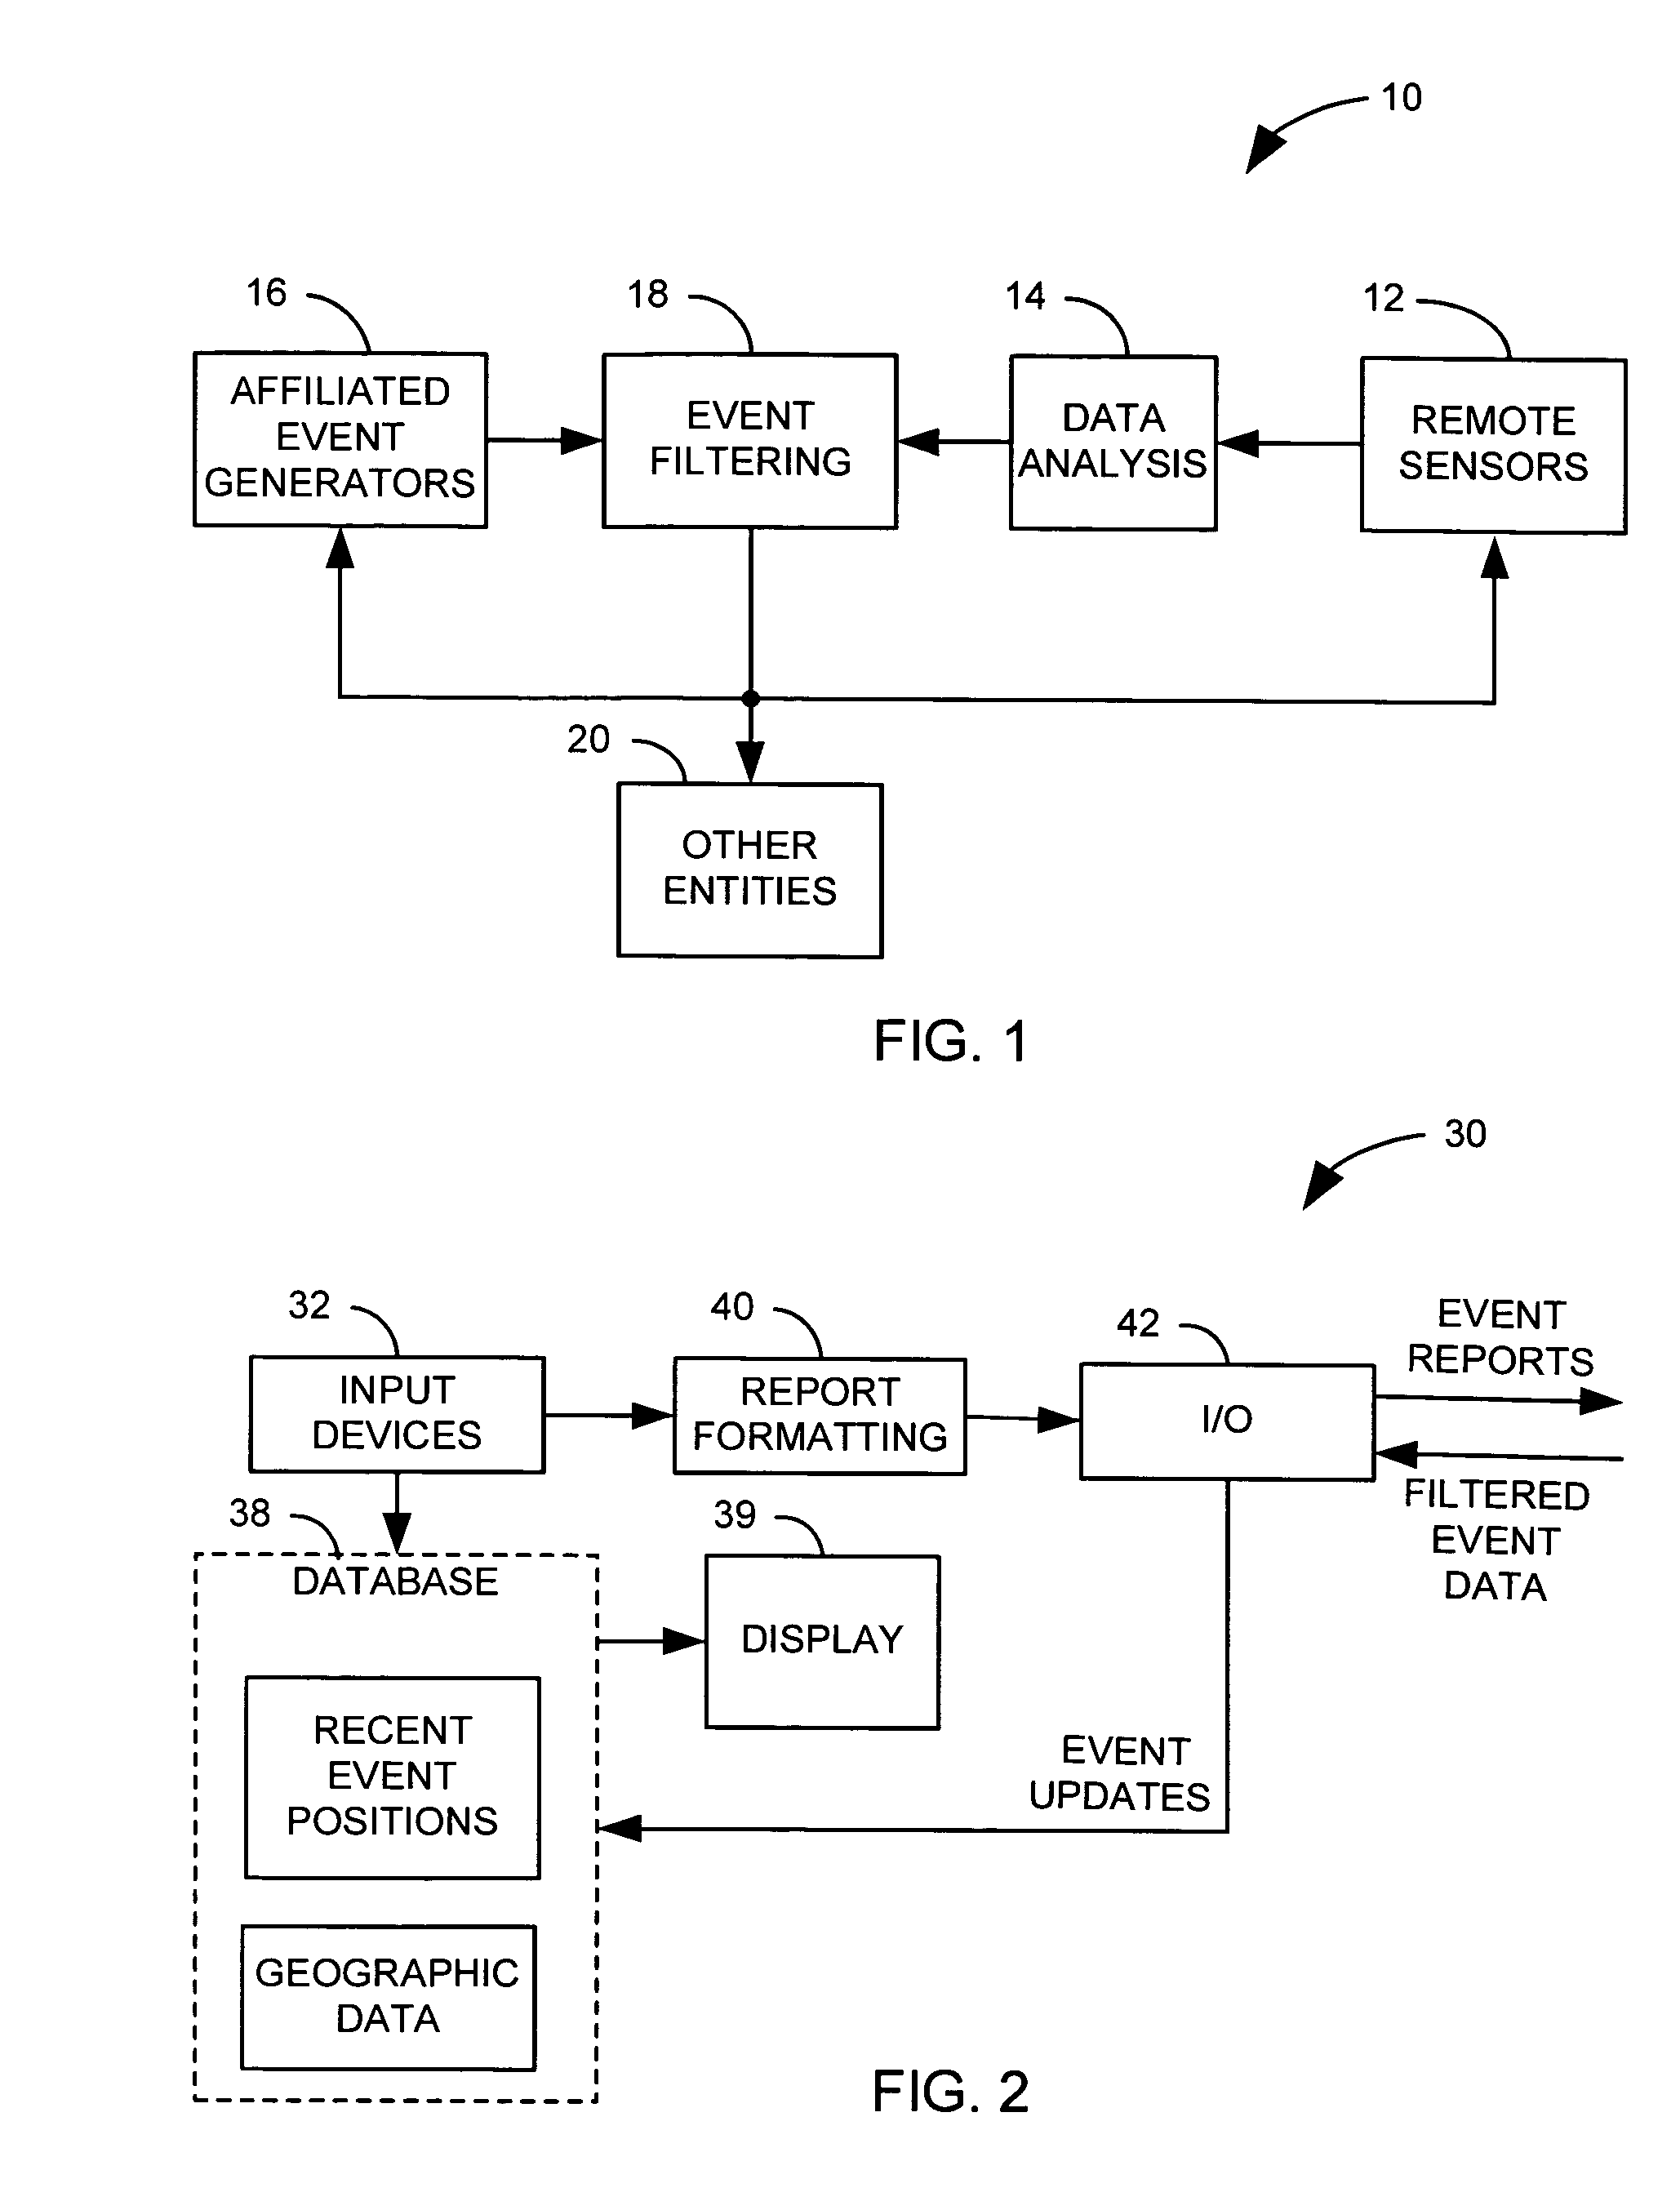 Event capture and filtering system